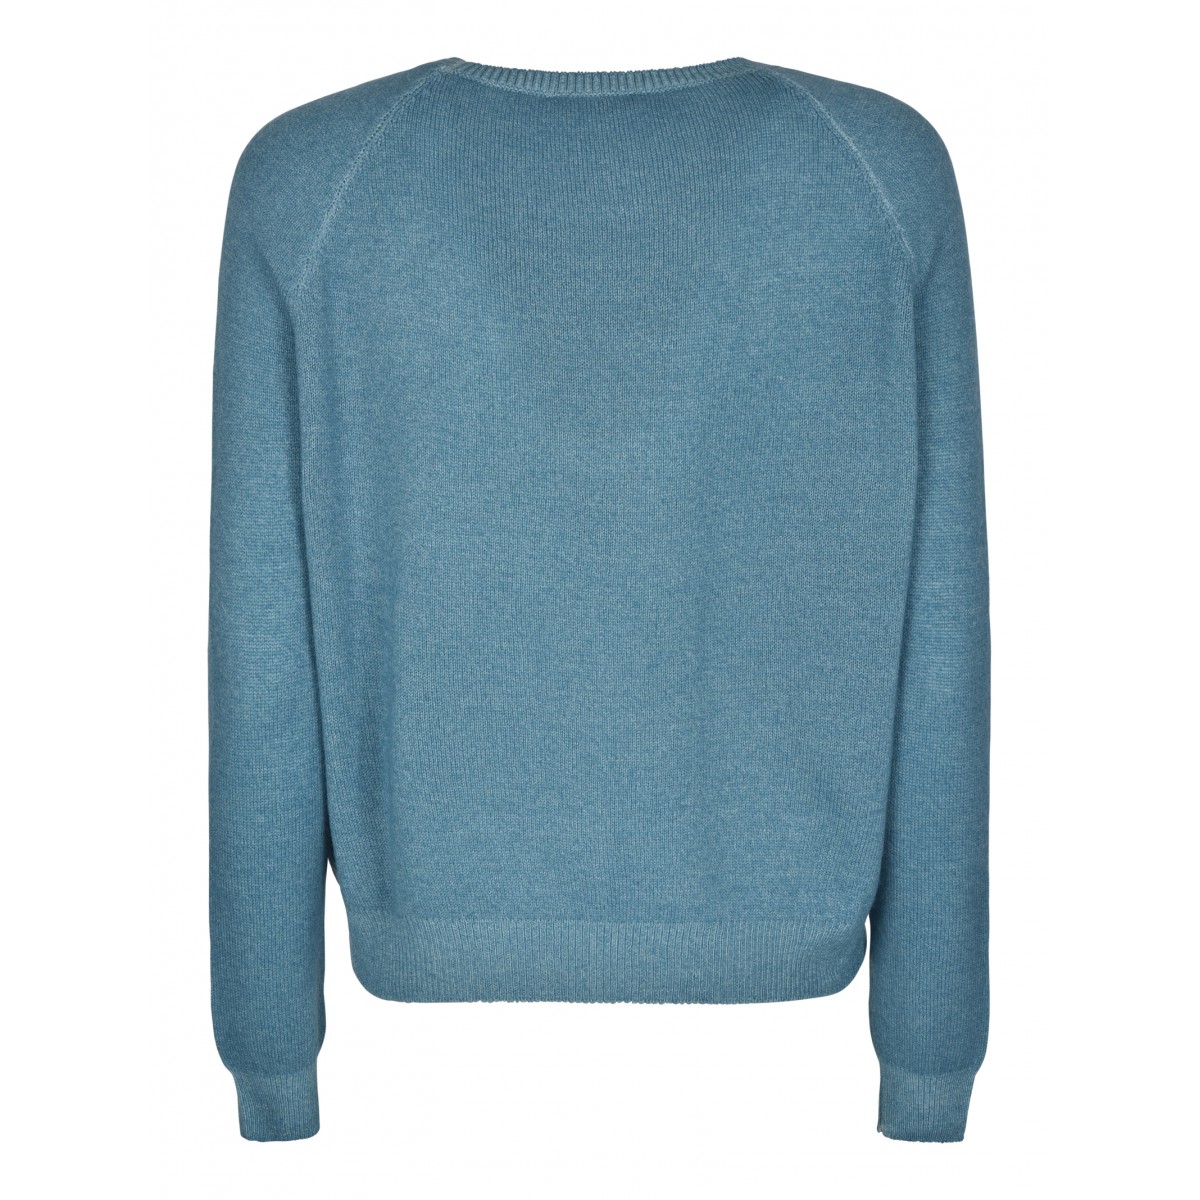 Turquoise Wool And Cashmere Sweater